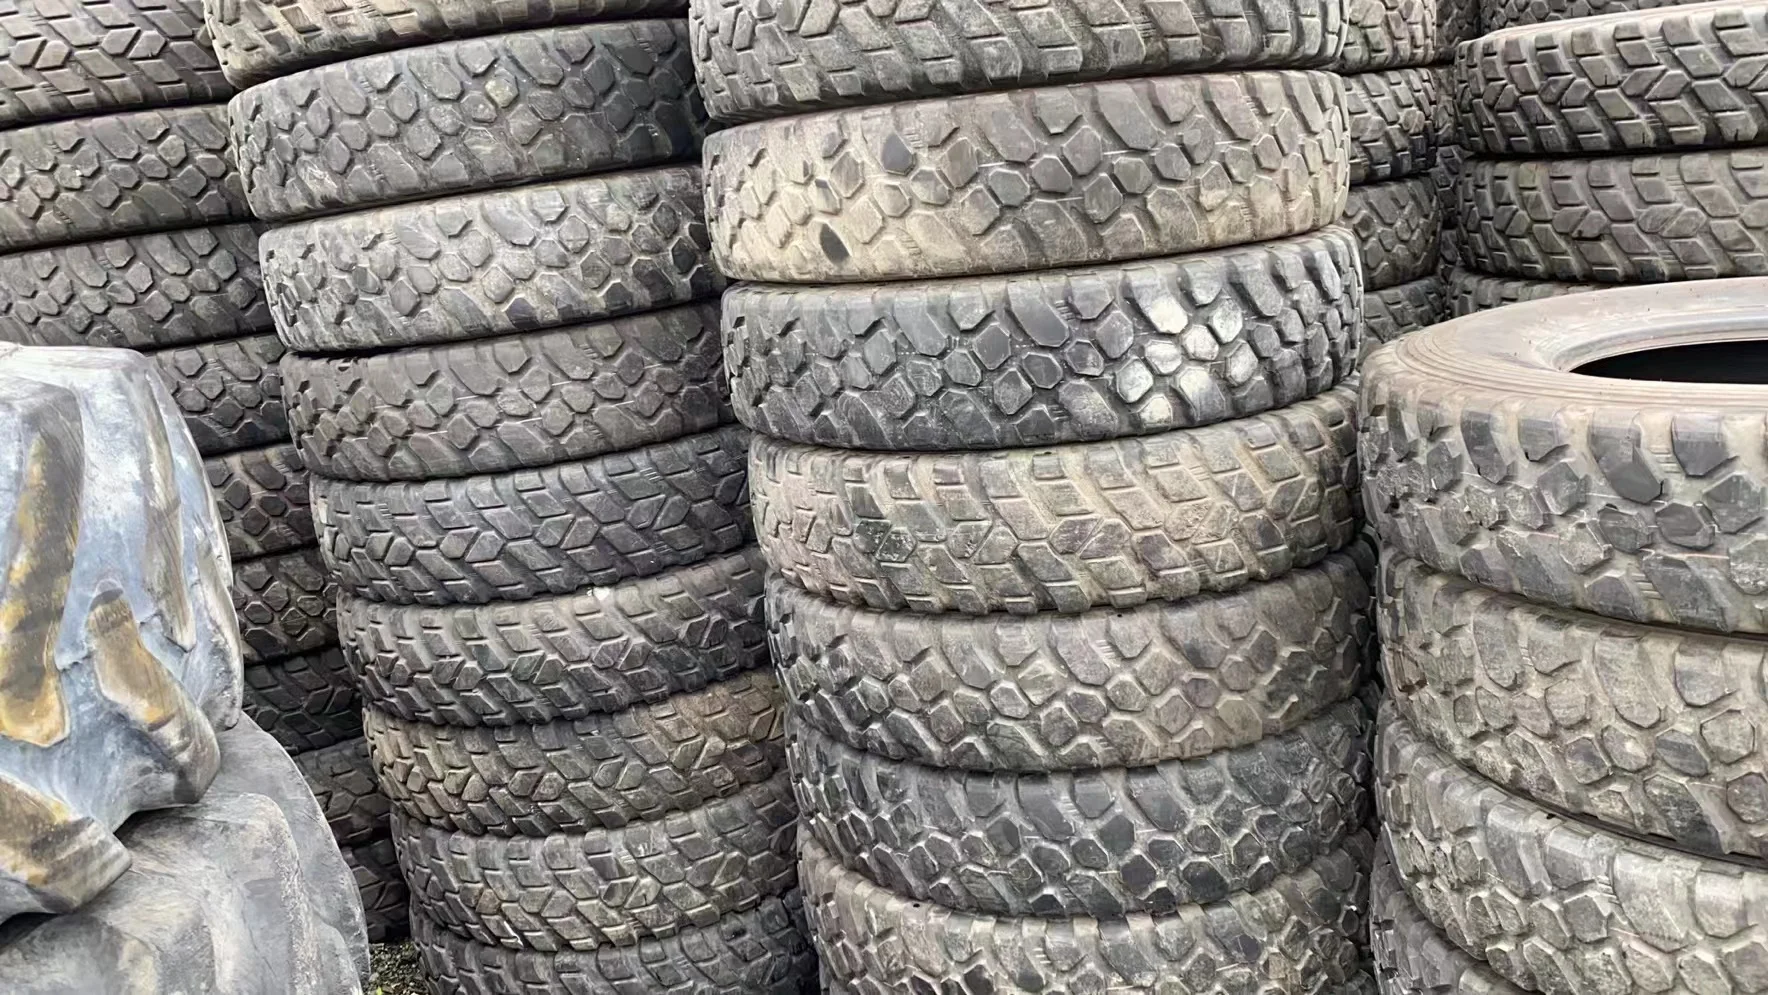 Source USA Grade used Tires For Sale, new sale used tyres best grade truck  tyres on m.alibaba.com